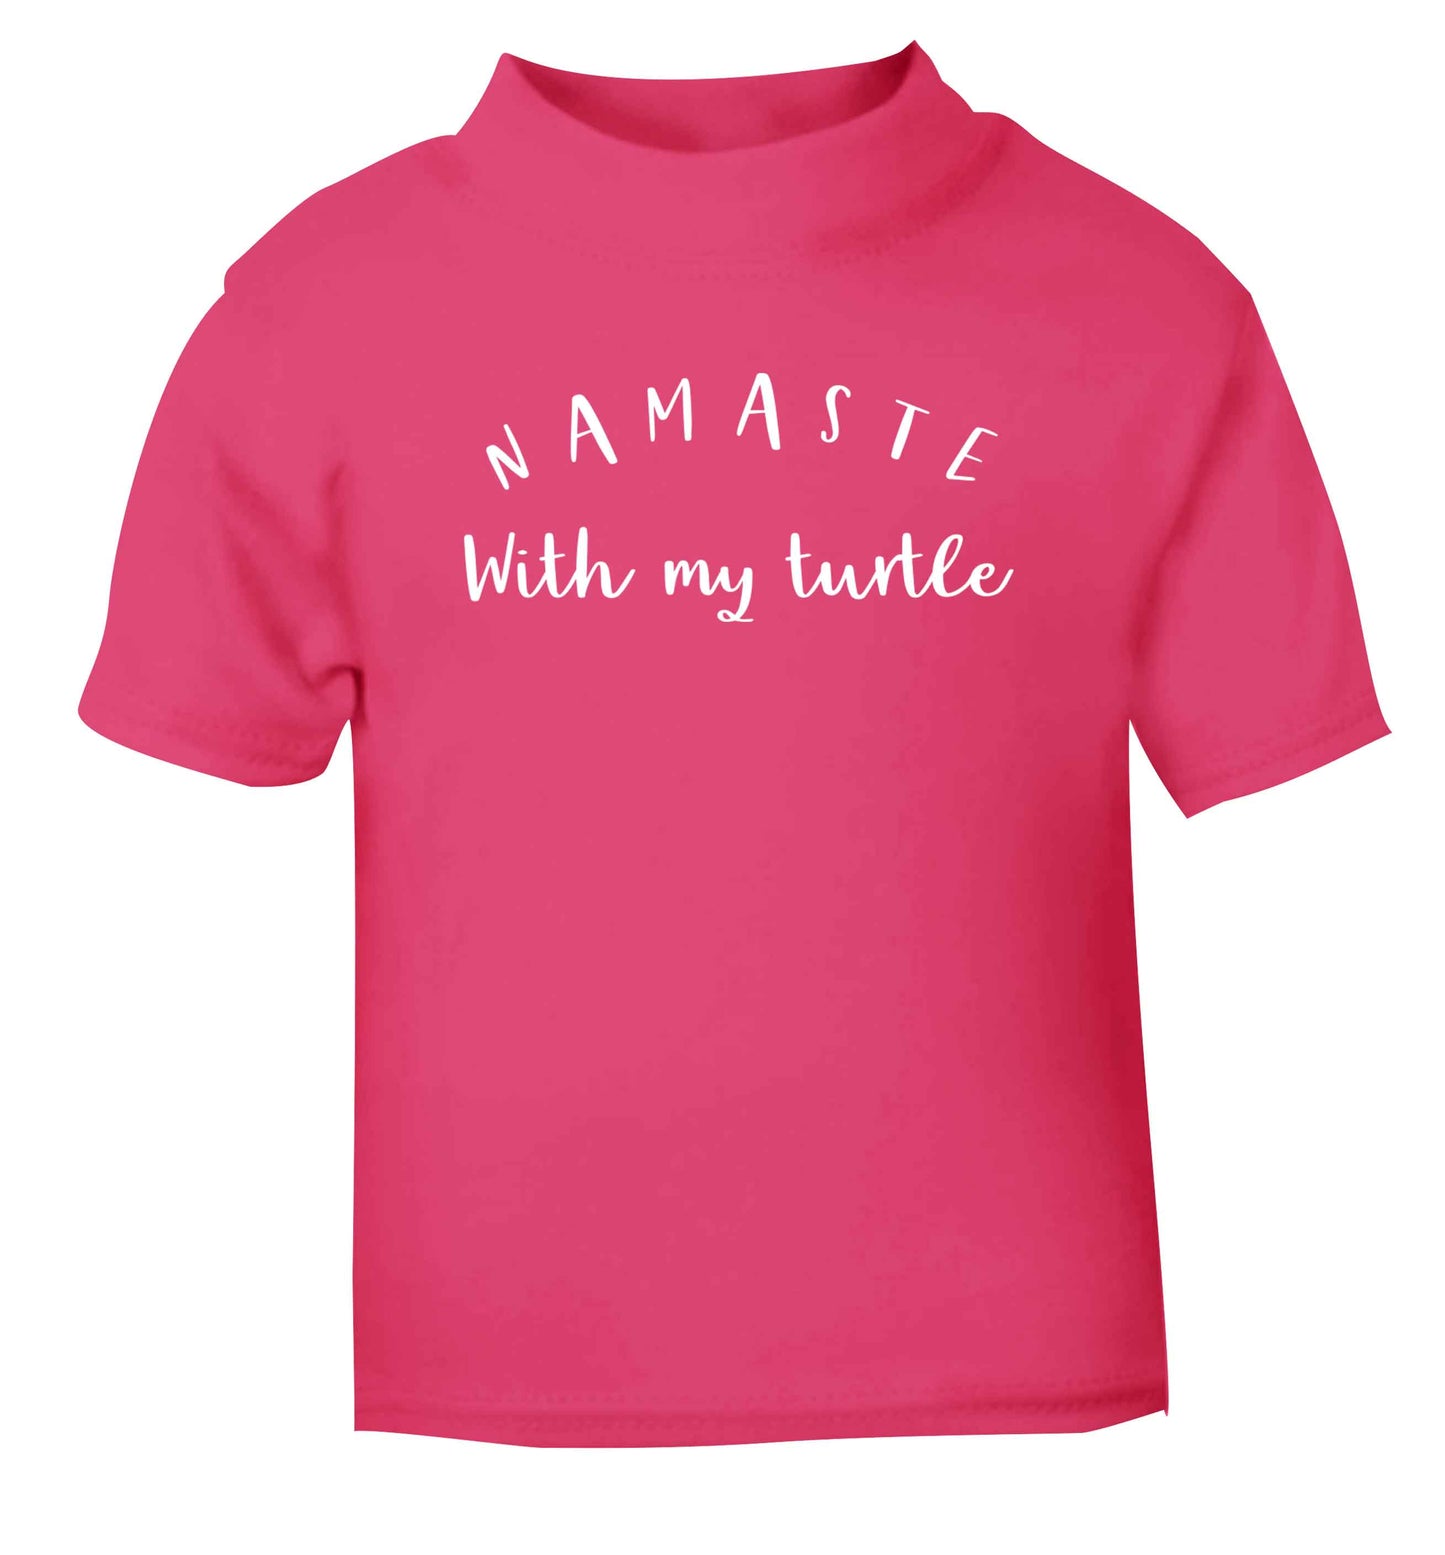 Namaste with my turtle pink Baby Toddler Tshirt 2 Years